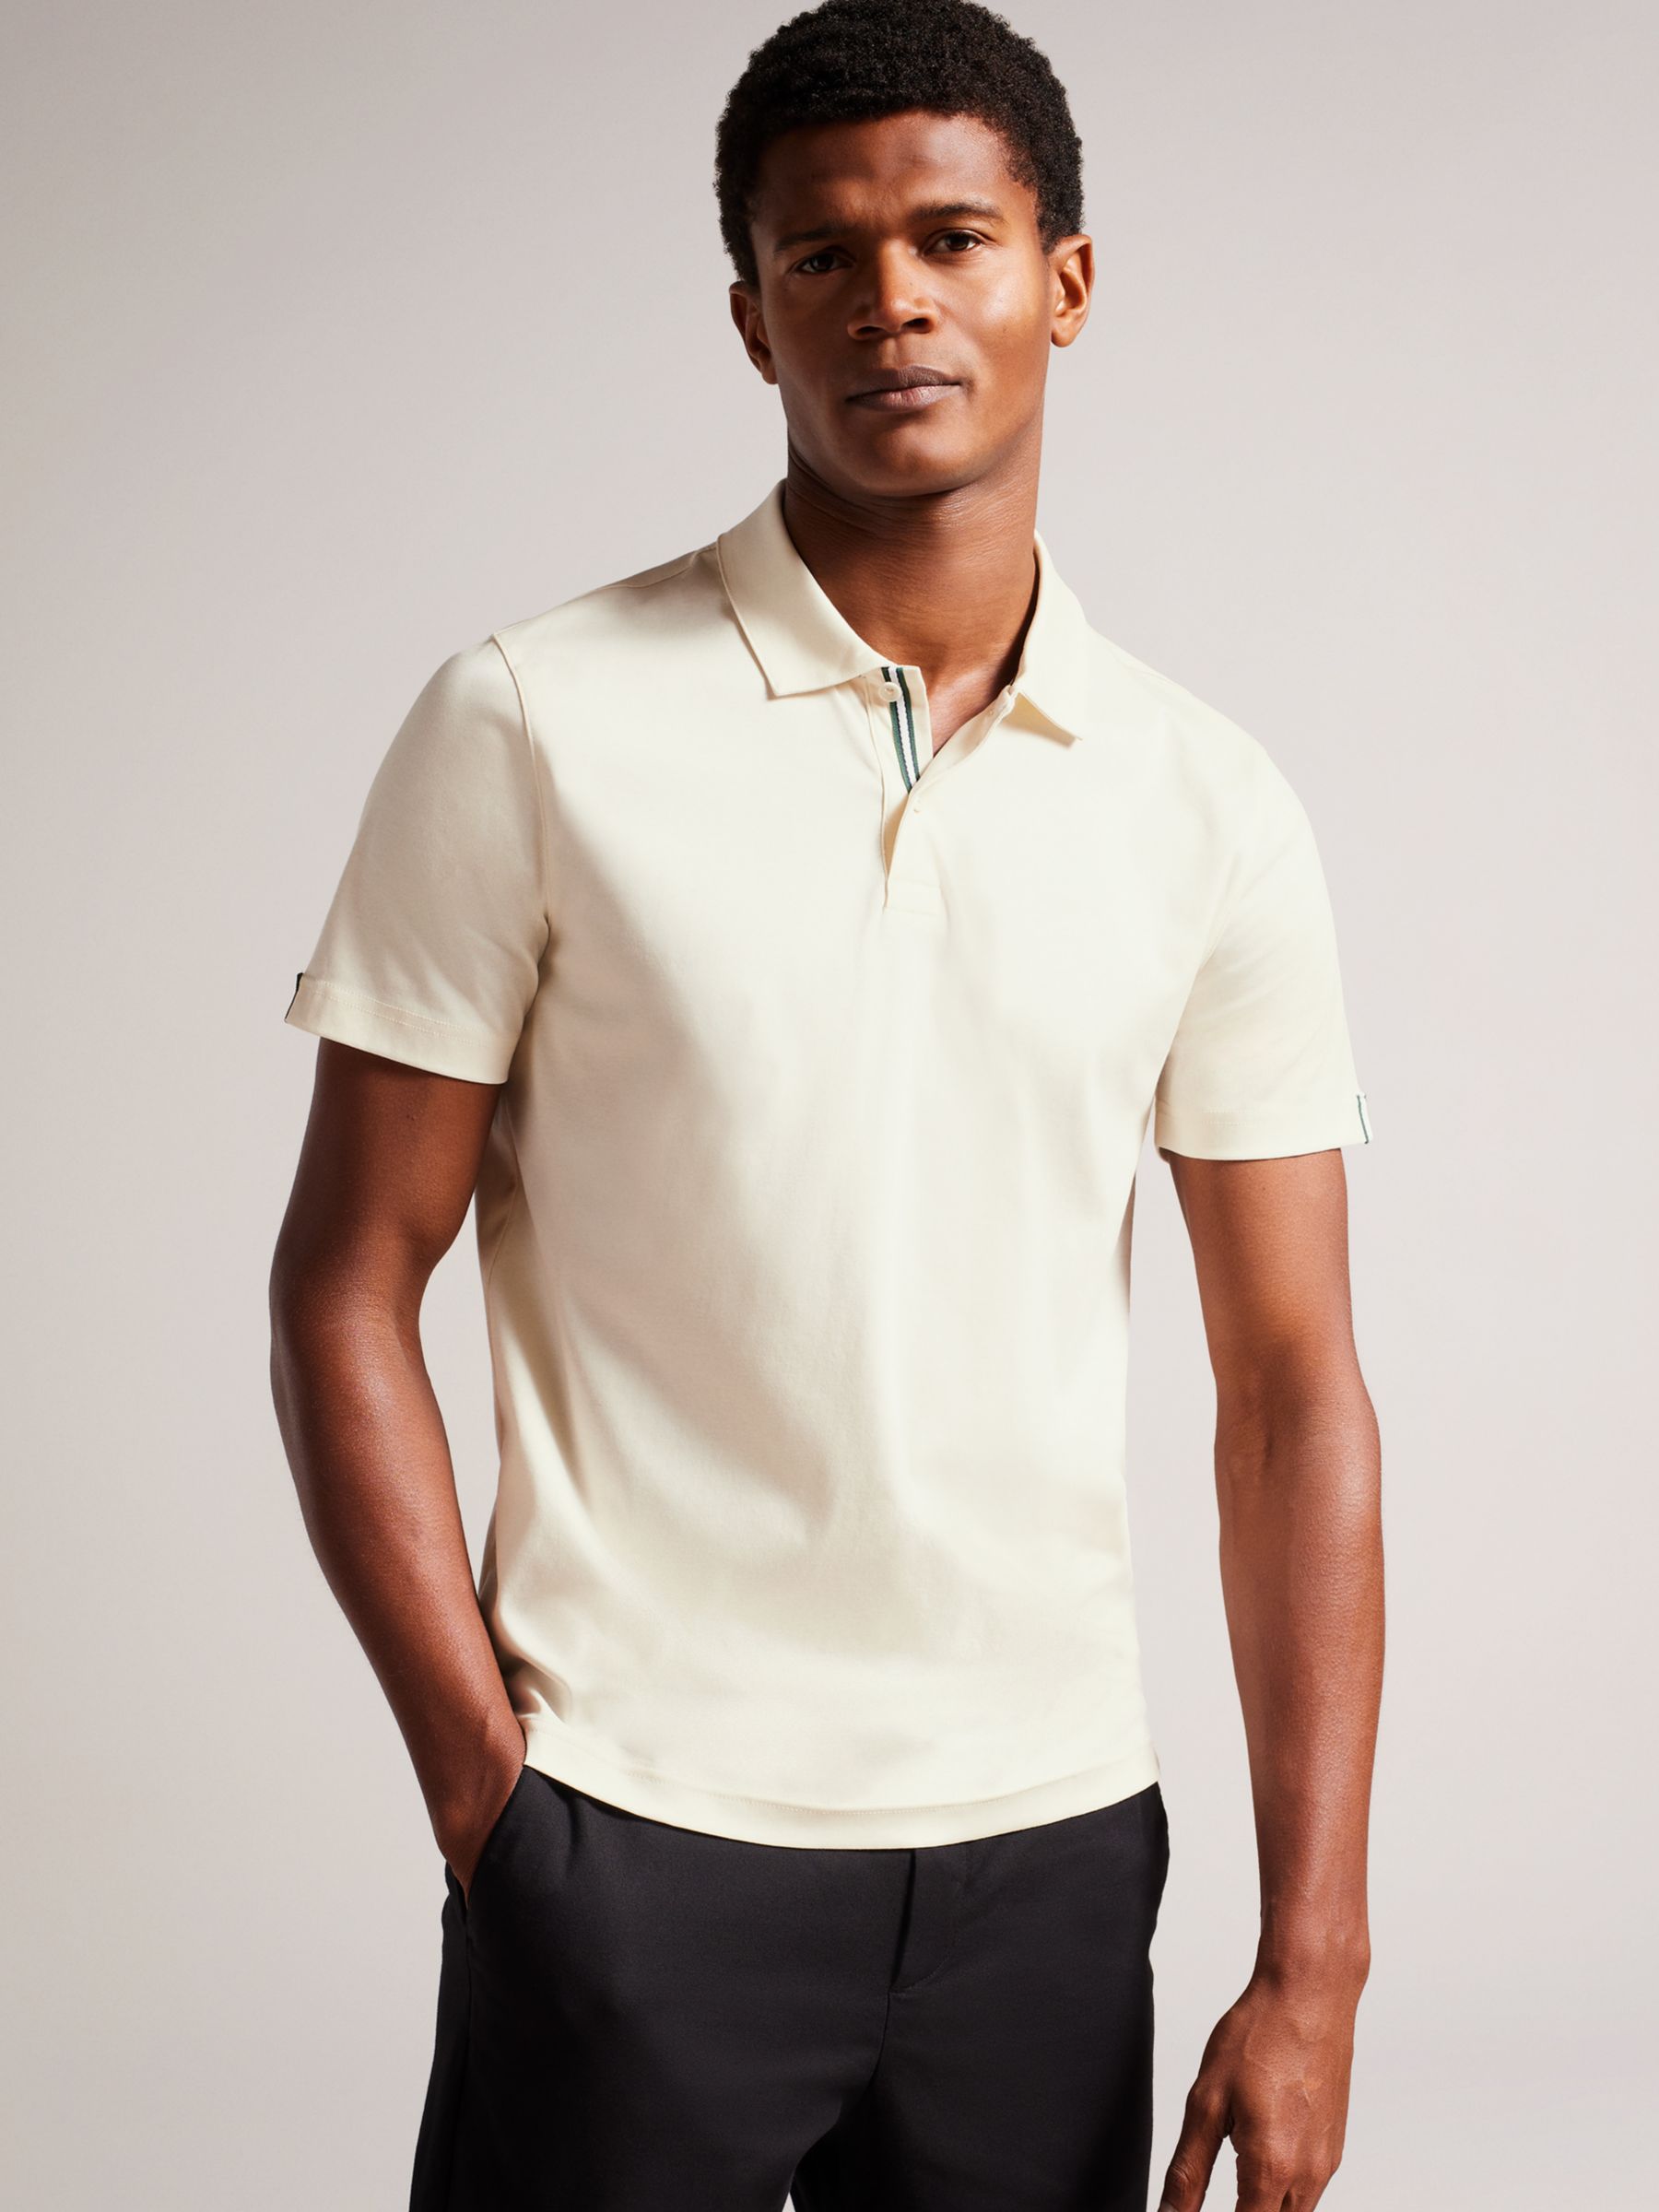 Ted Baker Short Sleeve Slim Soft Touch Polo Top, White, S